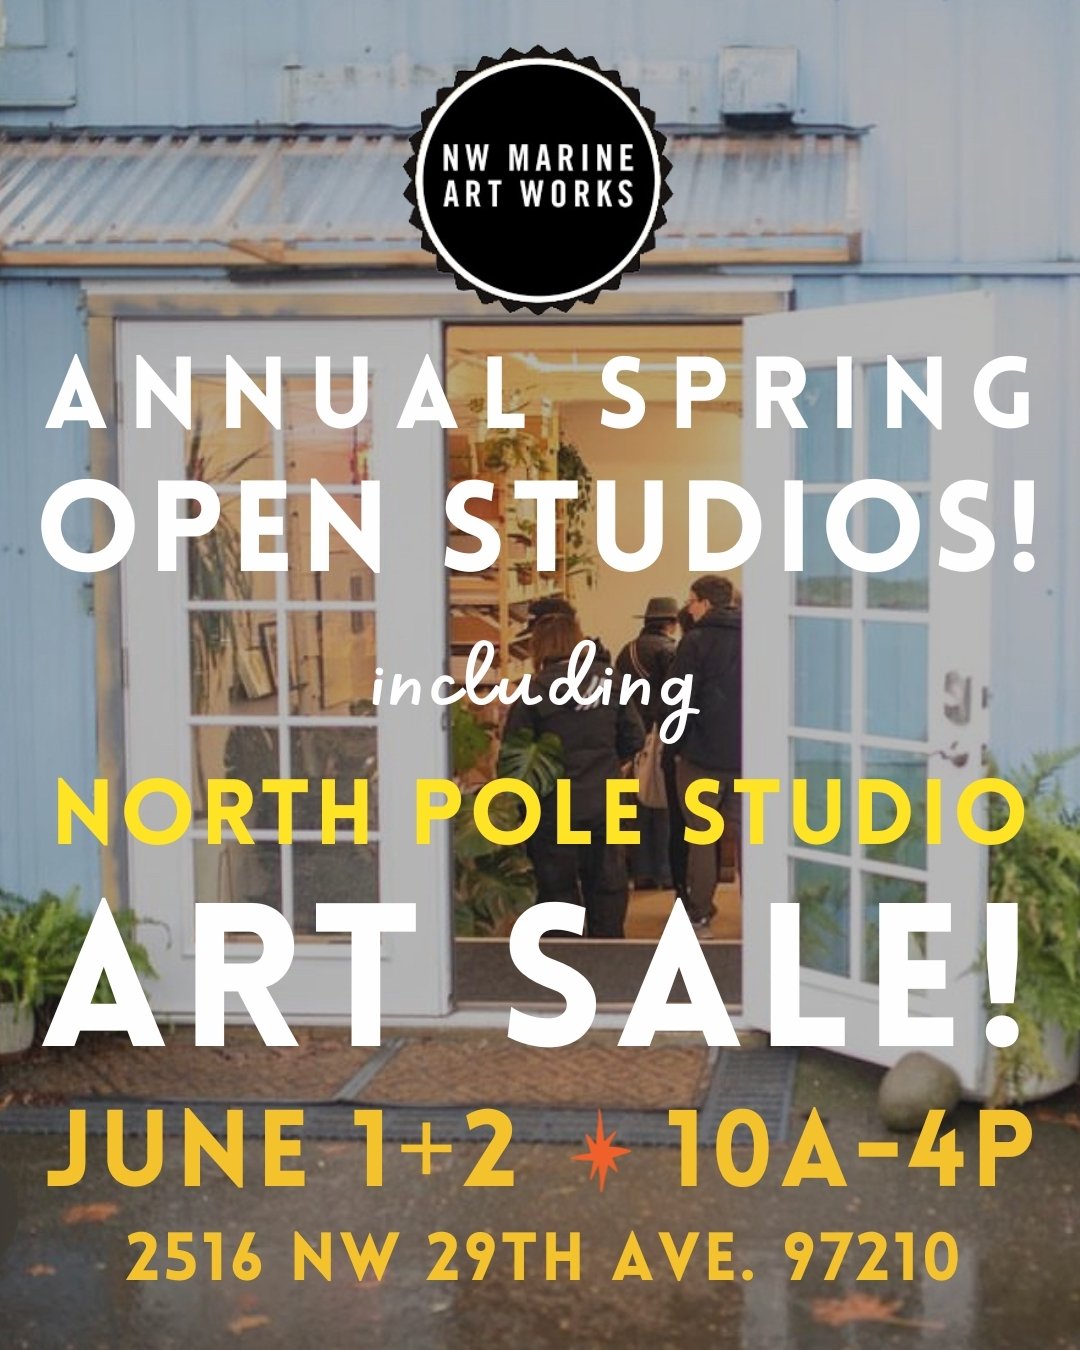 Mark your calendars! NW Marine Artworks annual spring Open Studios is on June 1 + 2 (Sat + Sun) from 10am - 4pm. During this amazing event, over 65 local artists open their studios to the public - including us! North Pole Studio will be having a big 